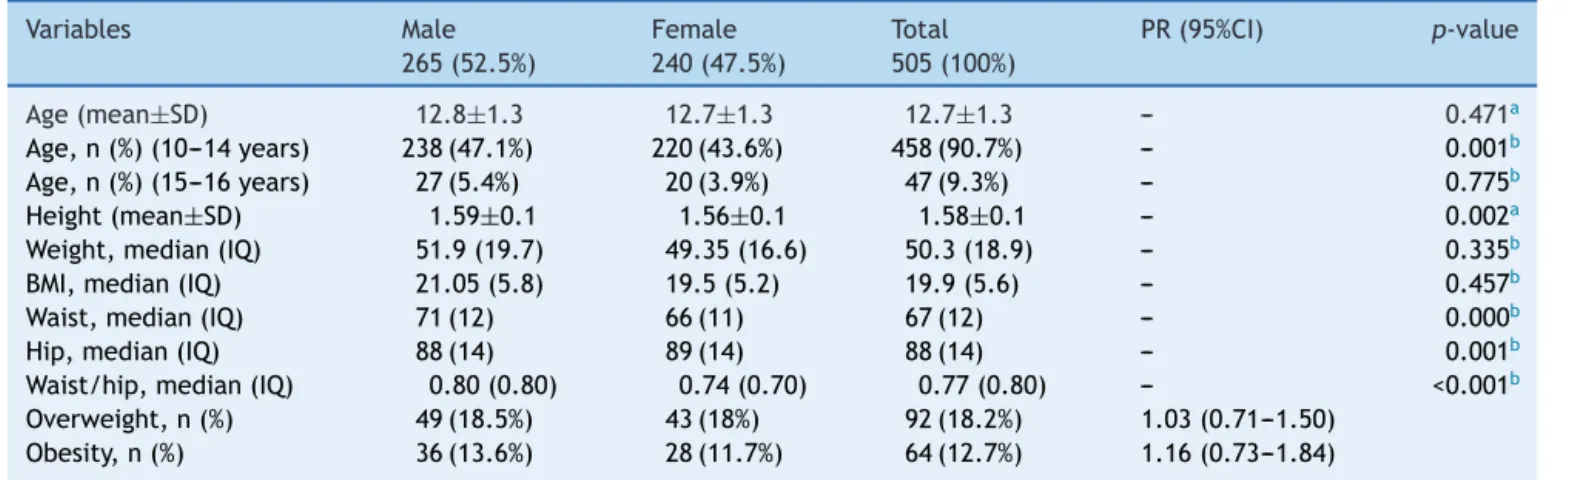 Table 1 Profile of the study population according to gender. Variables Male 265 (52.5%) Female240 (47.5%) Total505 (100%) PR (95%CI) p-value Age (mean±SD) 12.8±1.3 12.7±1.3 12.7±1.3 --- 0.471 a Age, n (%) (10---14 years) 238 (47.1%) 220 (43.6%) 458 (90.7%)